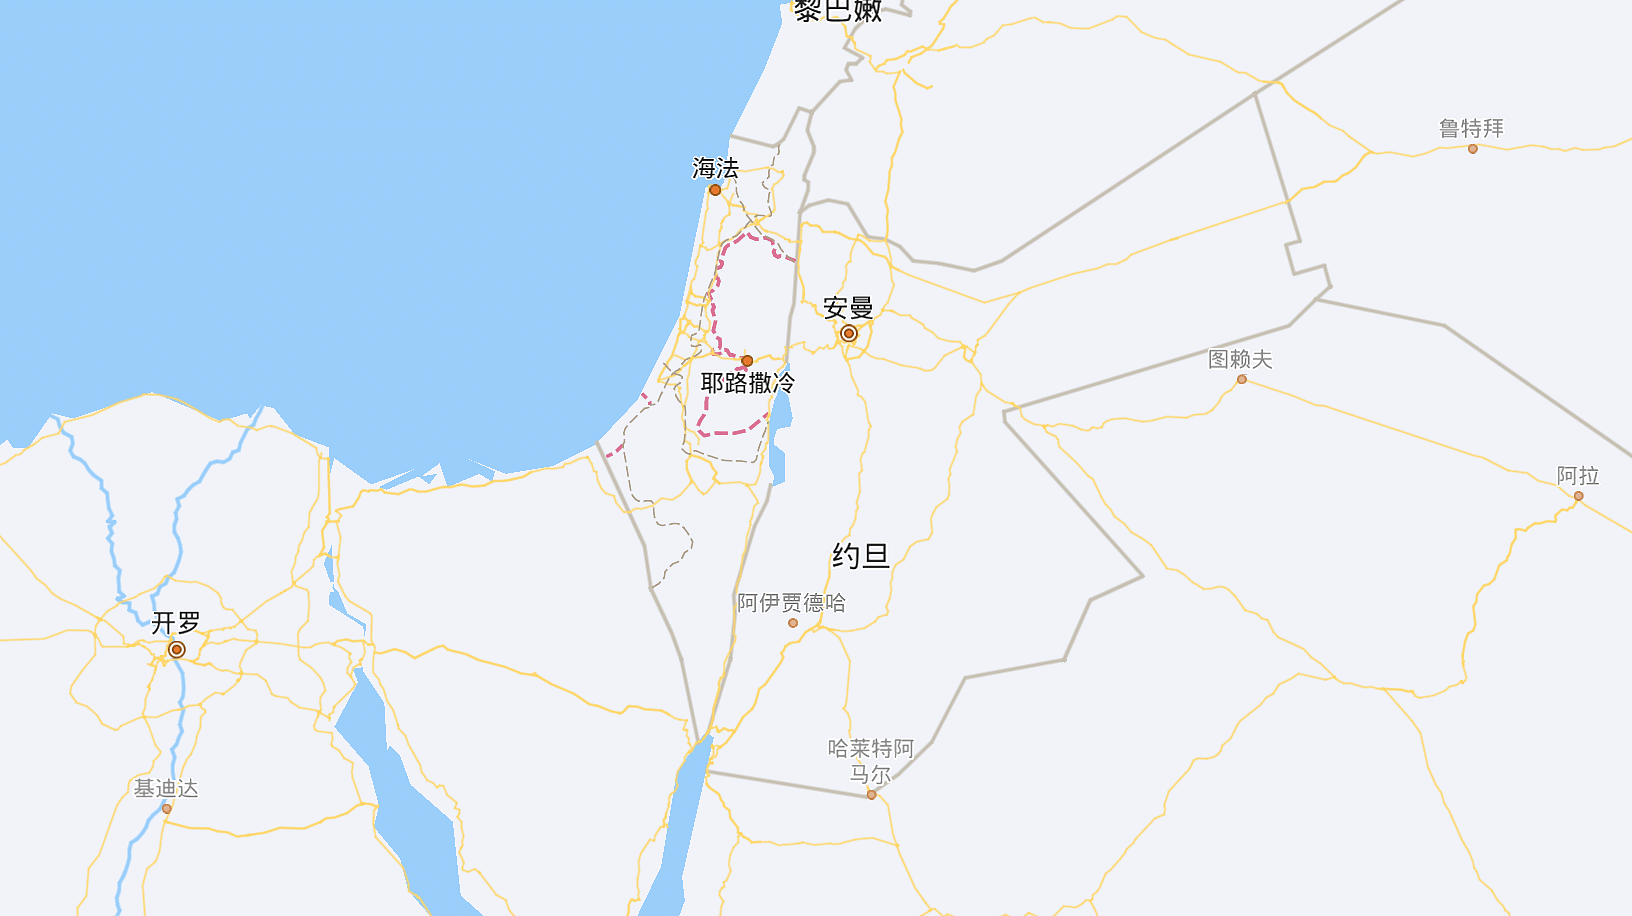 Baidu map demarcates borders and labels and labels cities, but no names are given for Israel or Palestinian territories as a whole | Screenshot